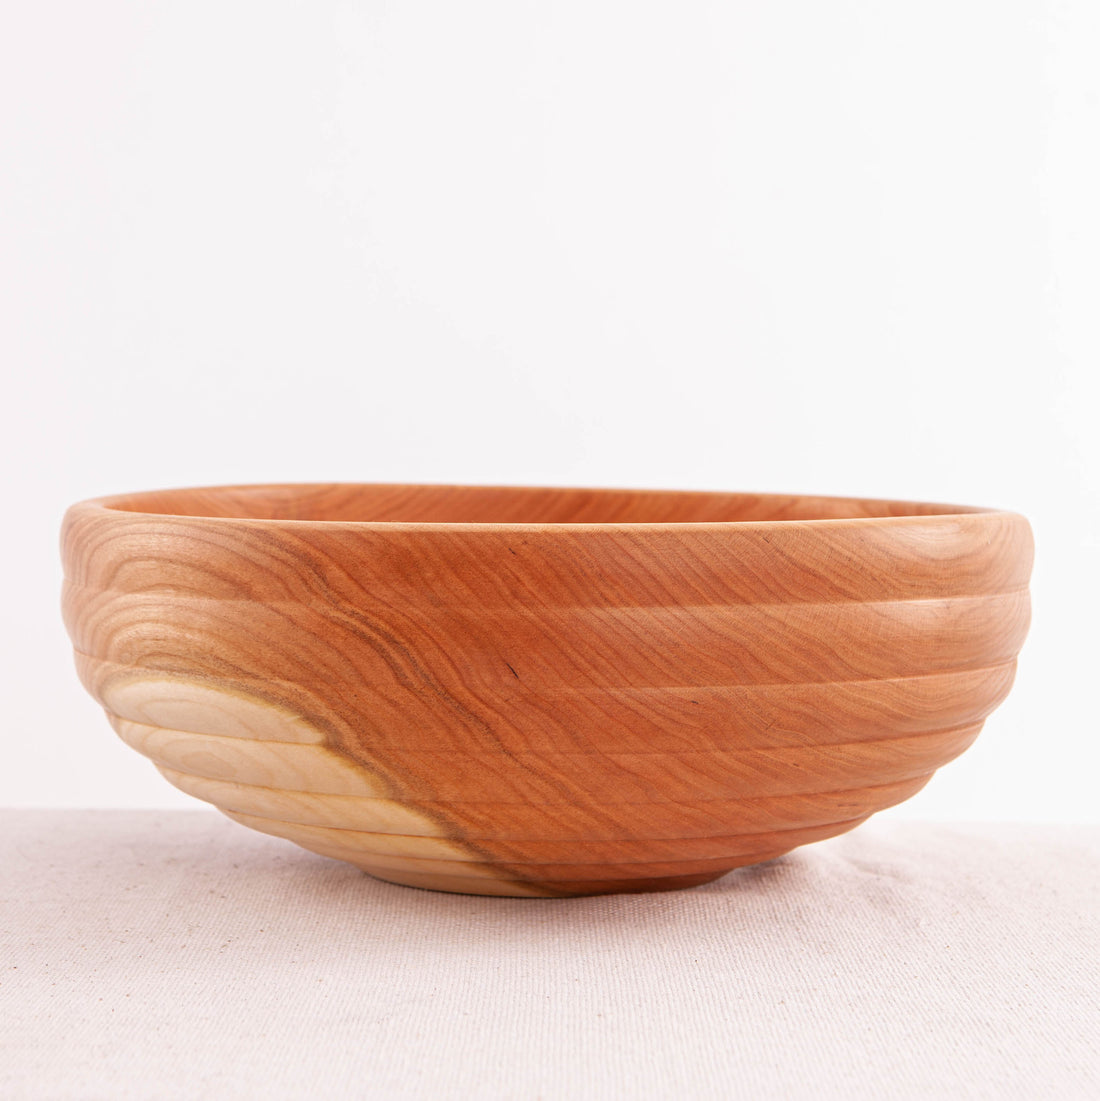 HIVE BOWL IN CHERRY 13"x 5"